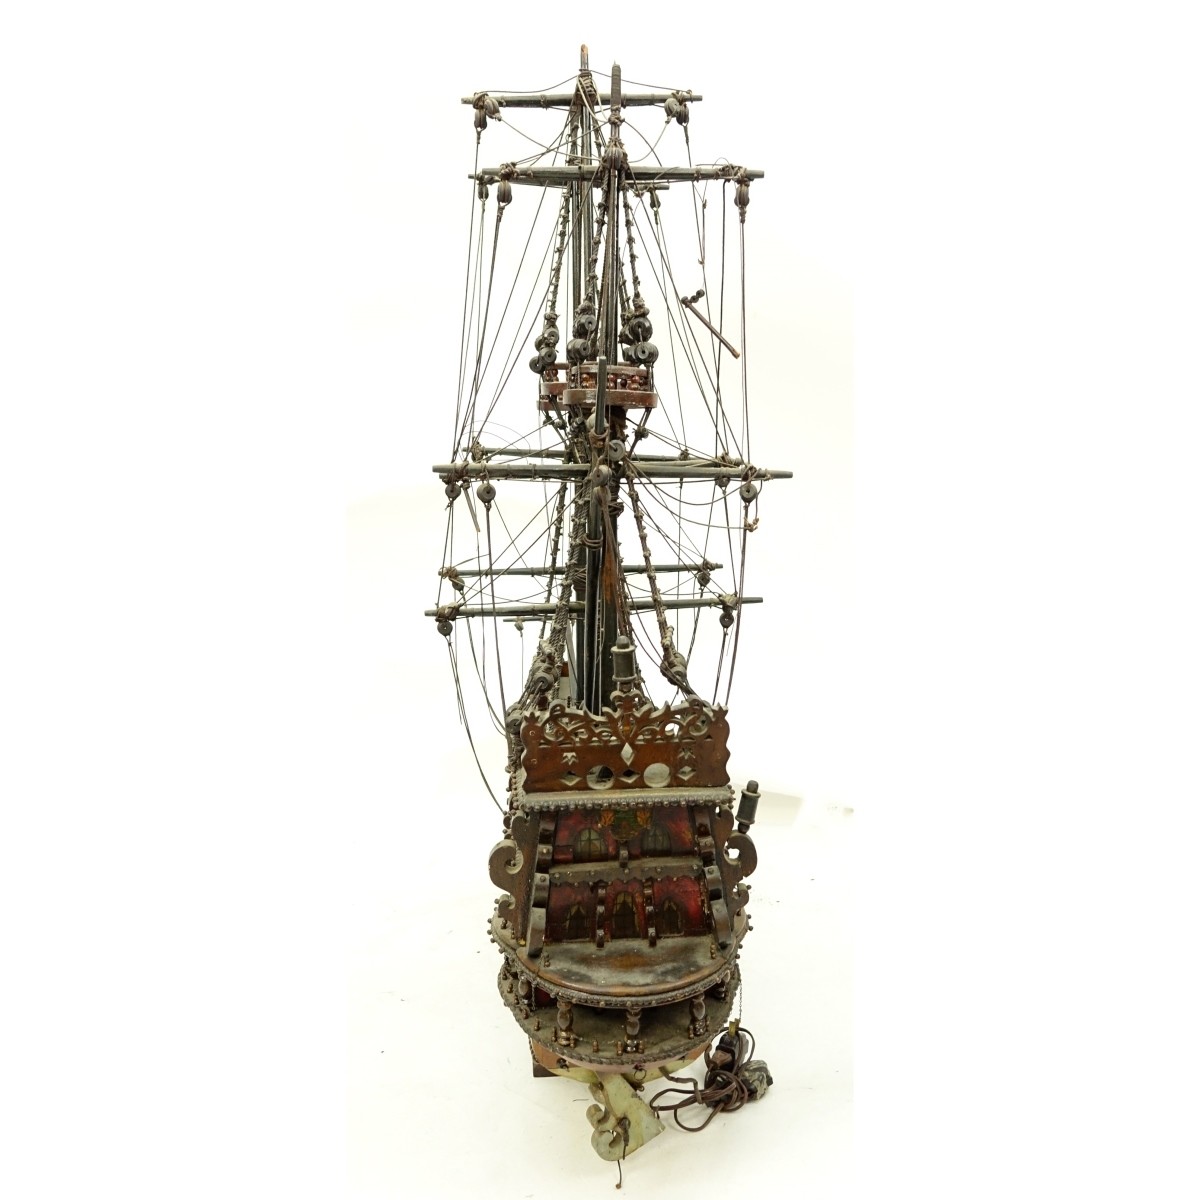 Antique Model Of A Spanish Galleon